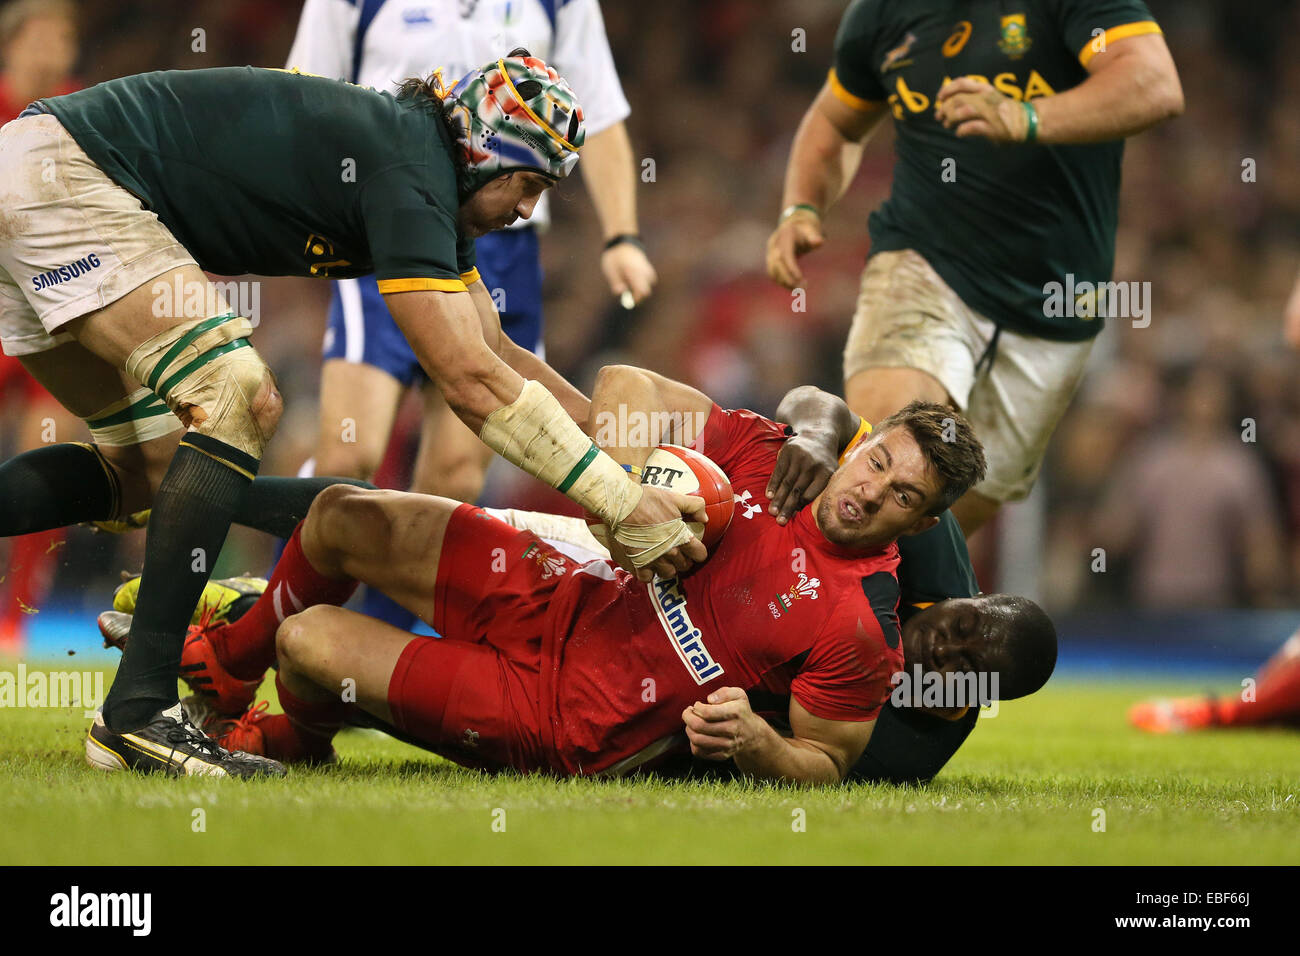 Cardiff, UK. 29th Nov, 2014. Rhys Webb of Wales is held up just short of the try line - Autumn Internationals - Wales vs South Africa - Millennium Stadium - Cardiff - Wales - 29th November 2014 - Picture Simon Bellis/Sportimage. Credit:  csm/Alamy Live News Stock Photo